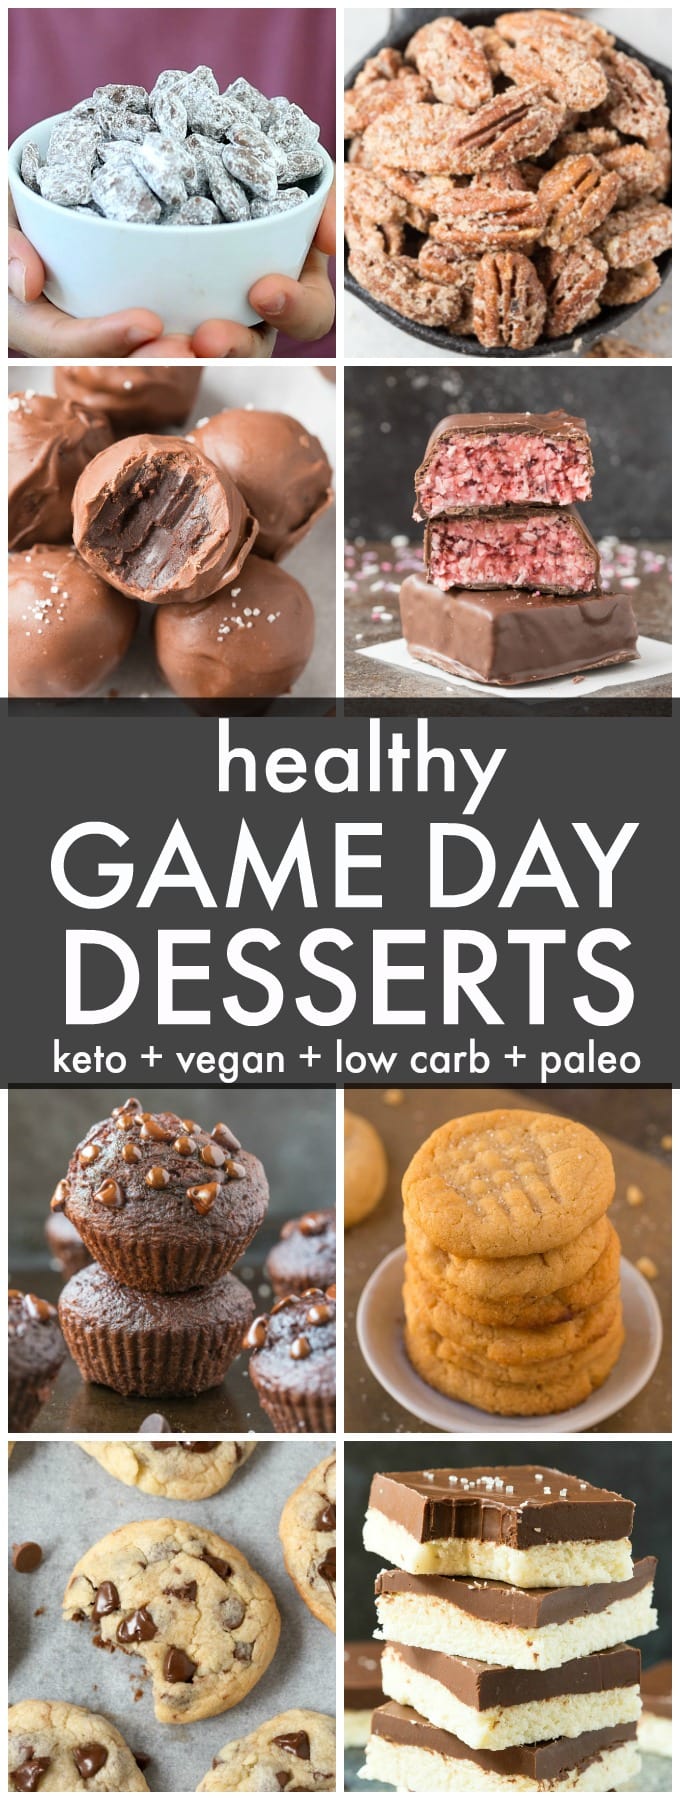 A collage of healthy keto and vegan game day and super bowl dessert recipes